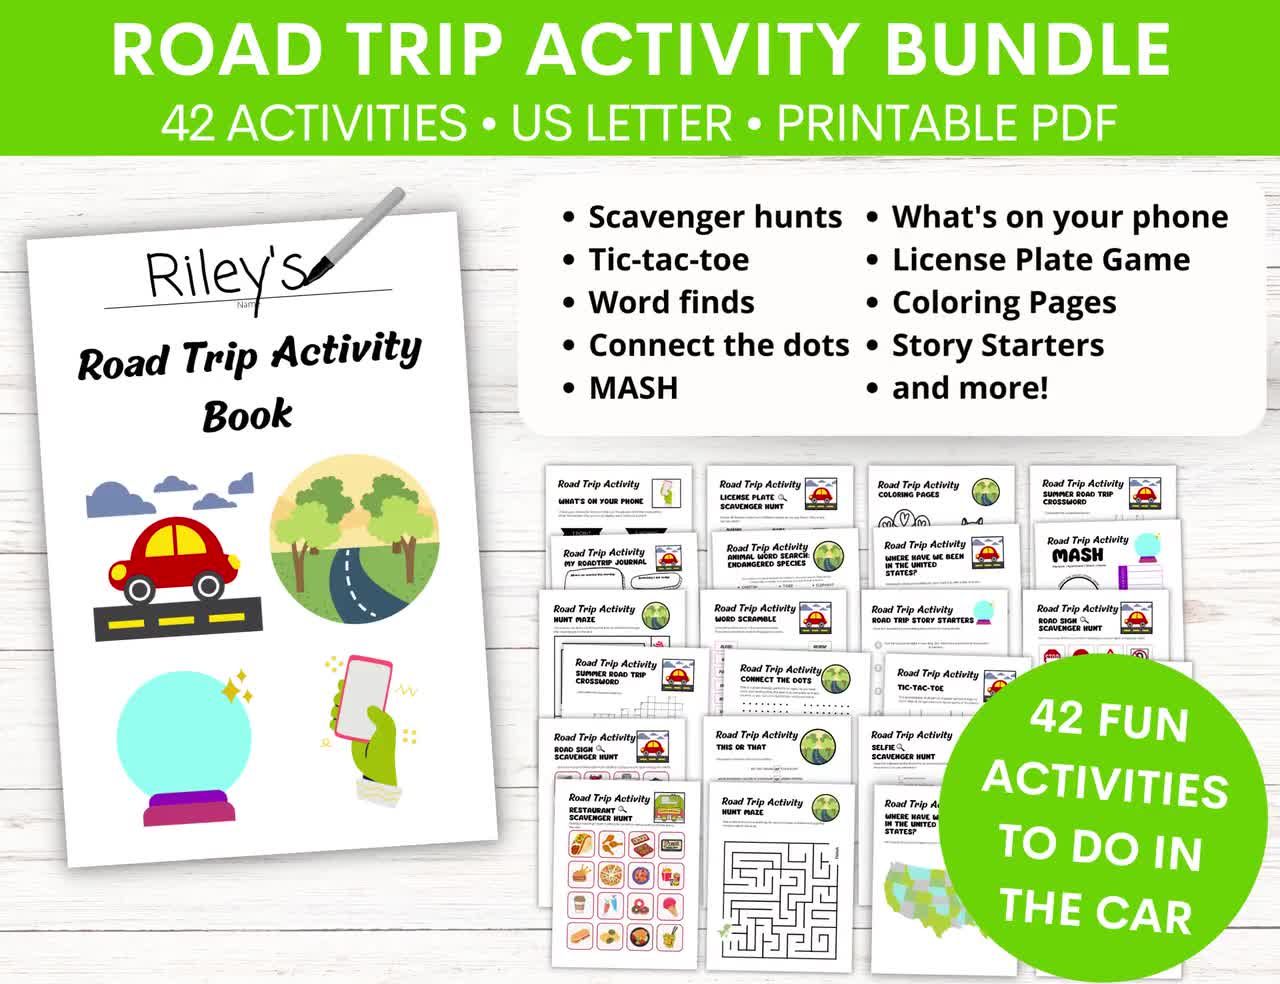 Kids Road Trip Activity & Games Bundle for Toddlers, Teens, Tweens  Printable Book or Kit for Summer Family Road Trip for Girls or Boys 